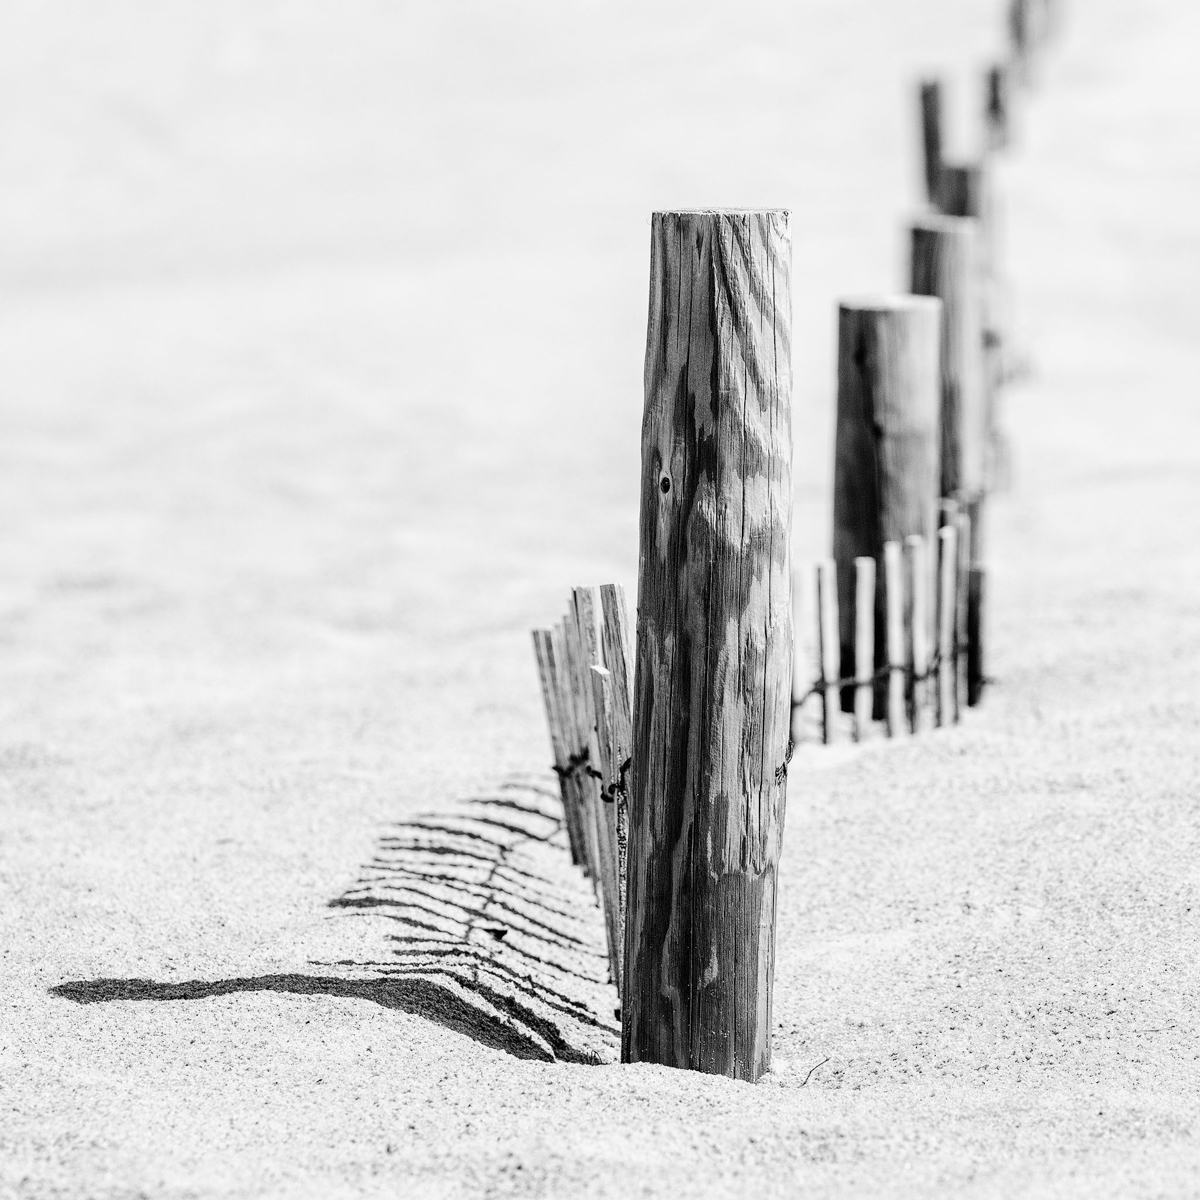 2021_05_Assateague-10766-Edit2048.jpg - I was captivated by the sinking sand  fences and the shadows they made along with the curving lines in the sand.